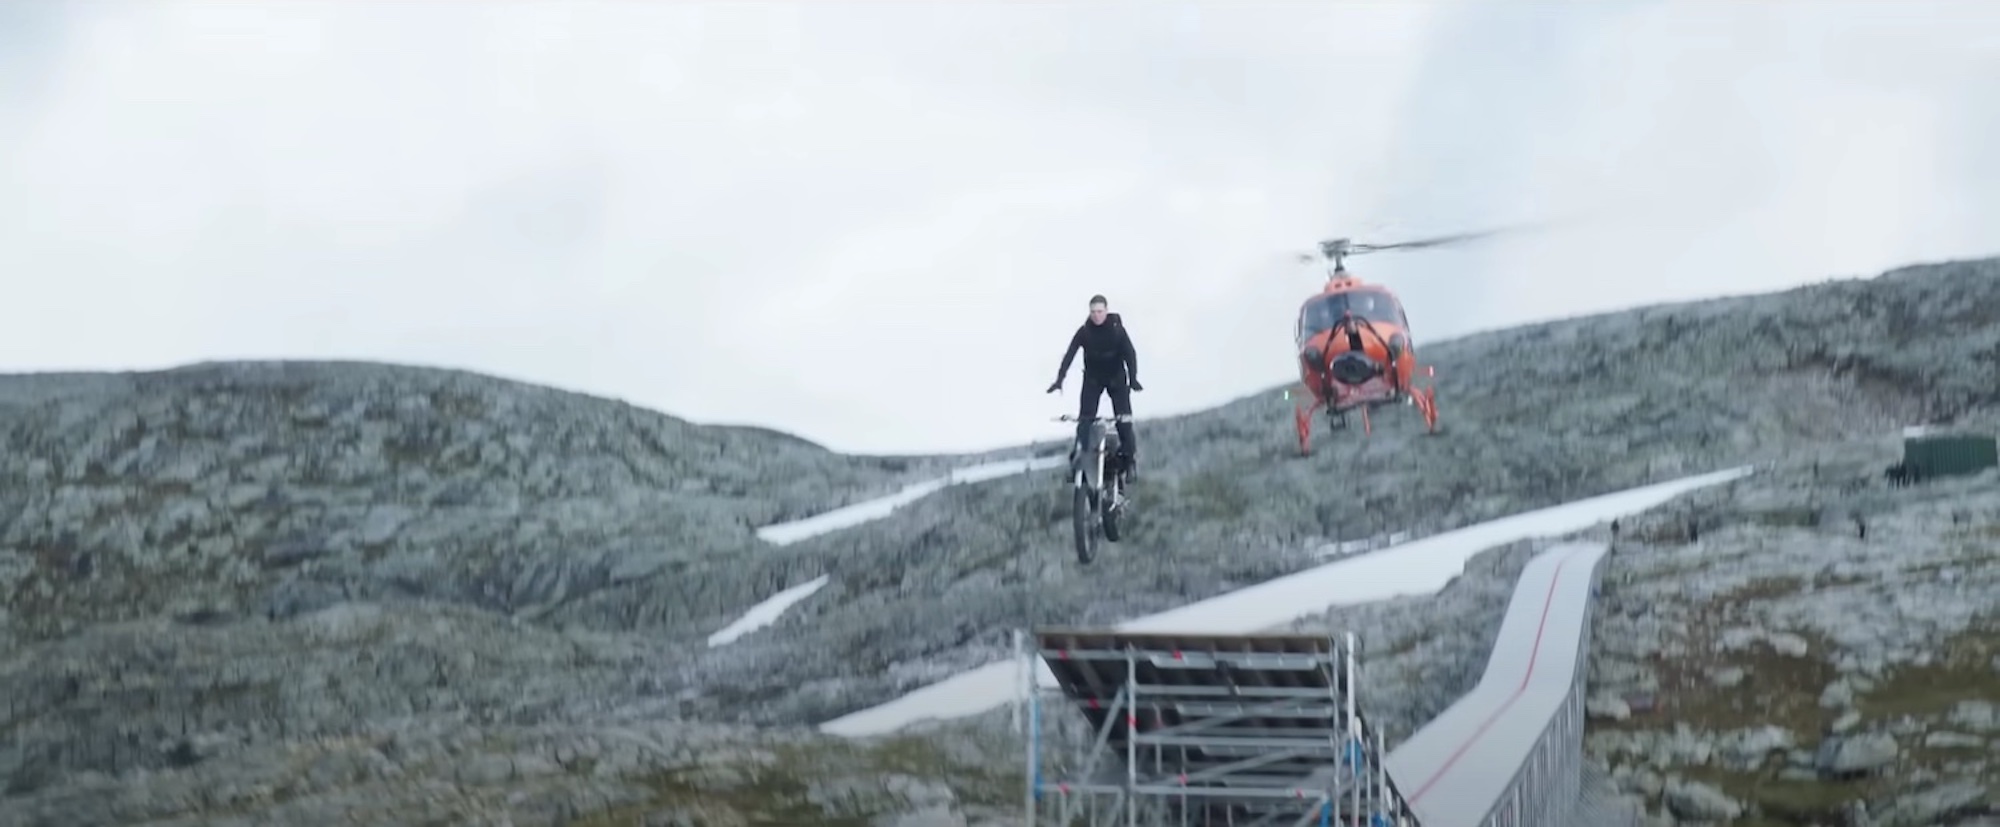 A view of the stunt Tom Cruise executed over the Preikestolen cliffs of Norway. Media sourced from Motor Biscuit.